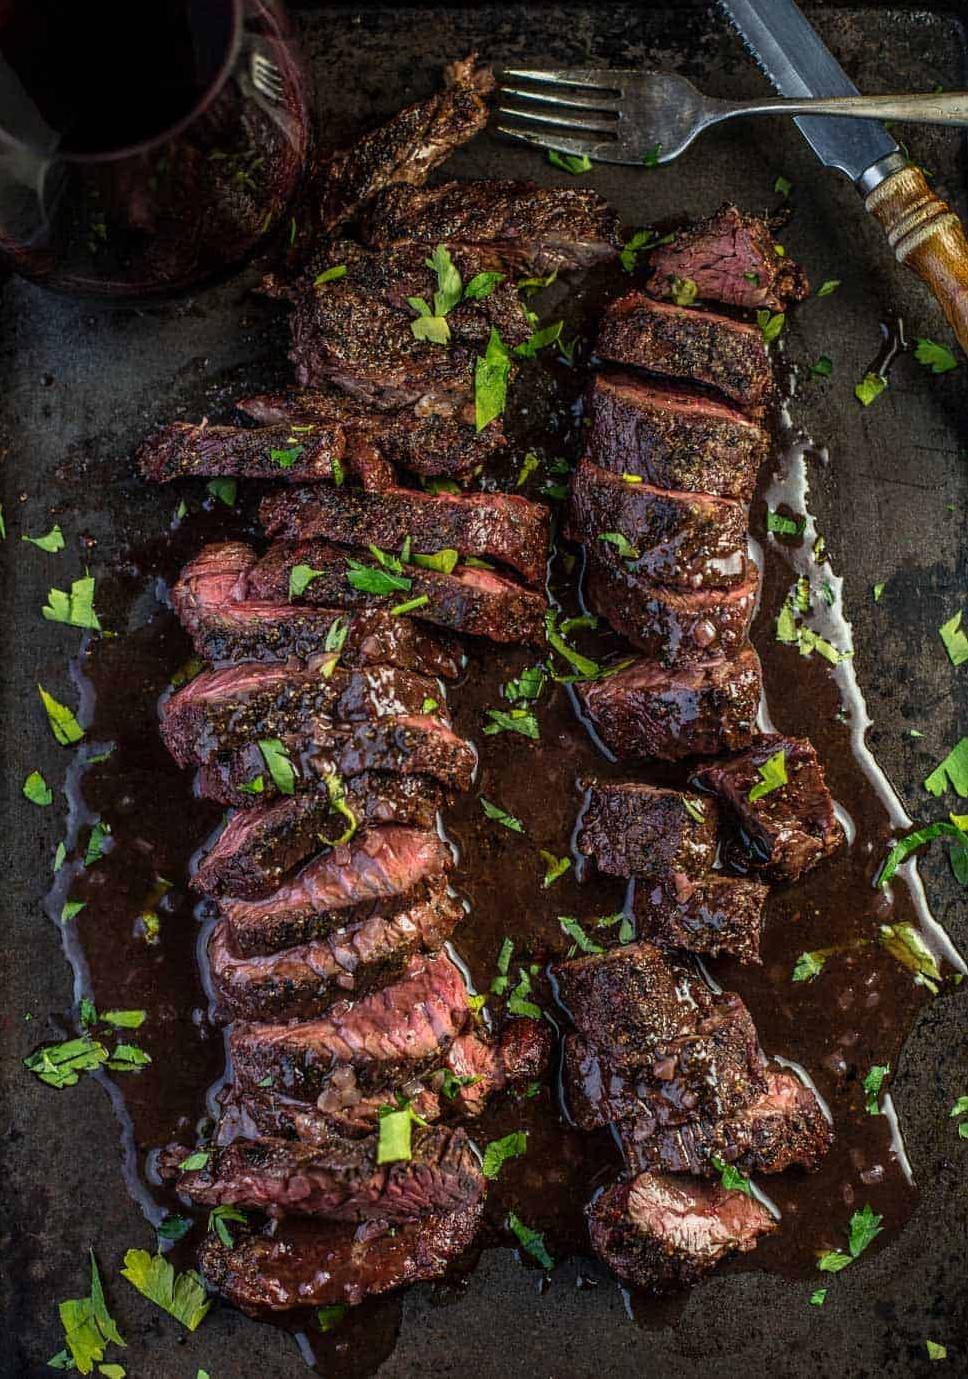  Savor the rich and robust flavors of this juicy skirt steak soaked in red-wine sauce.